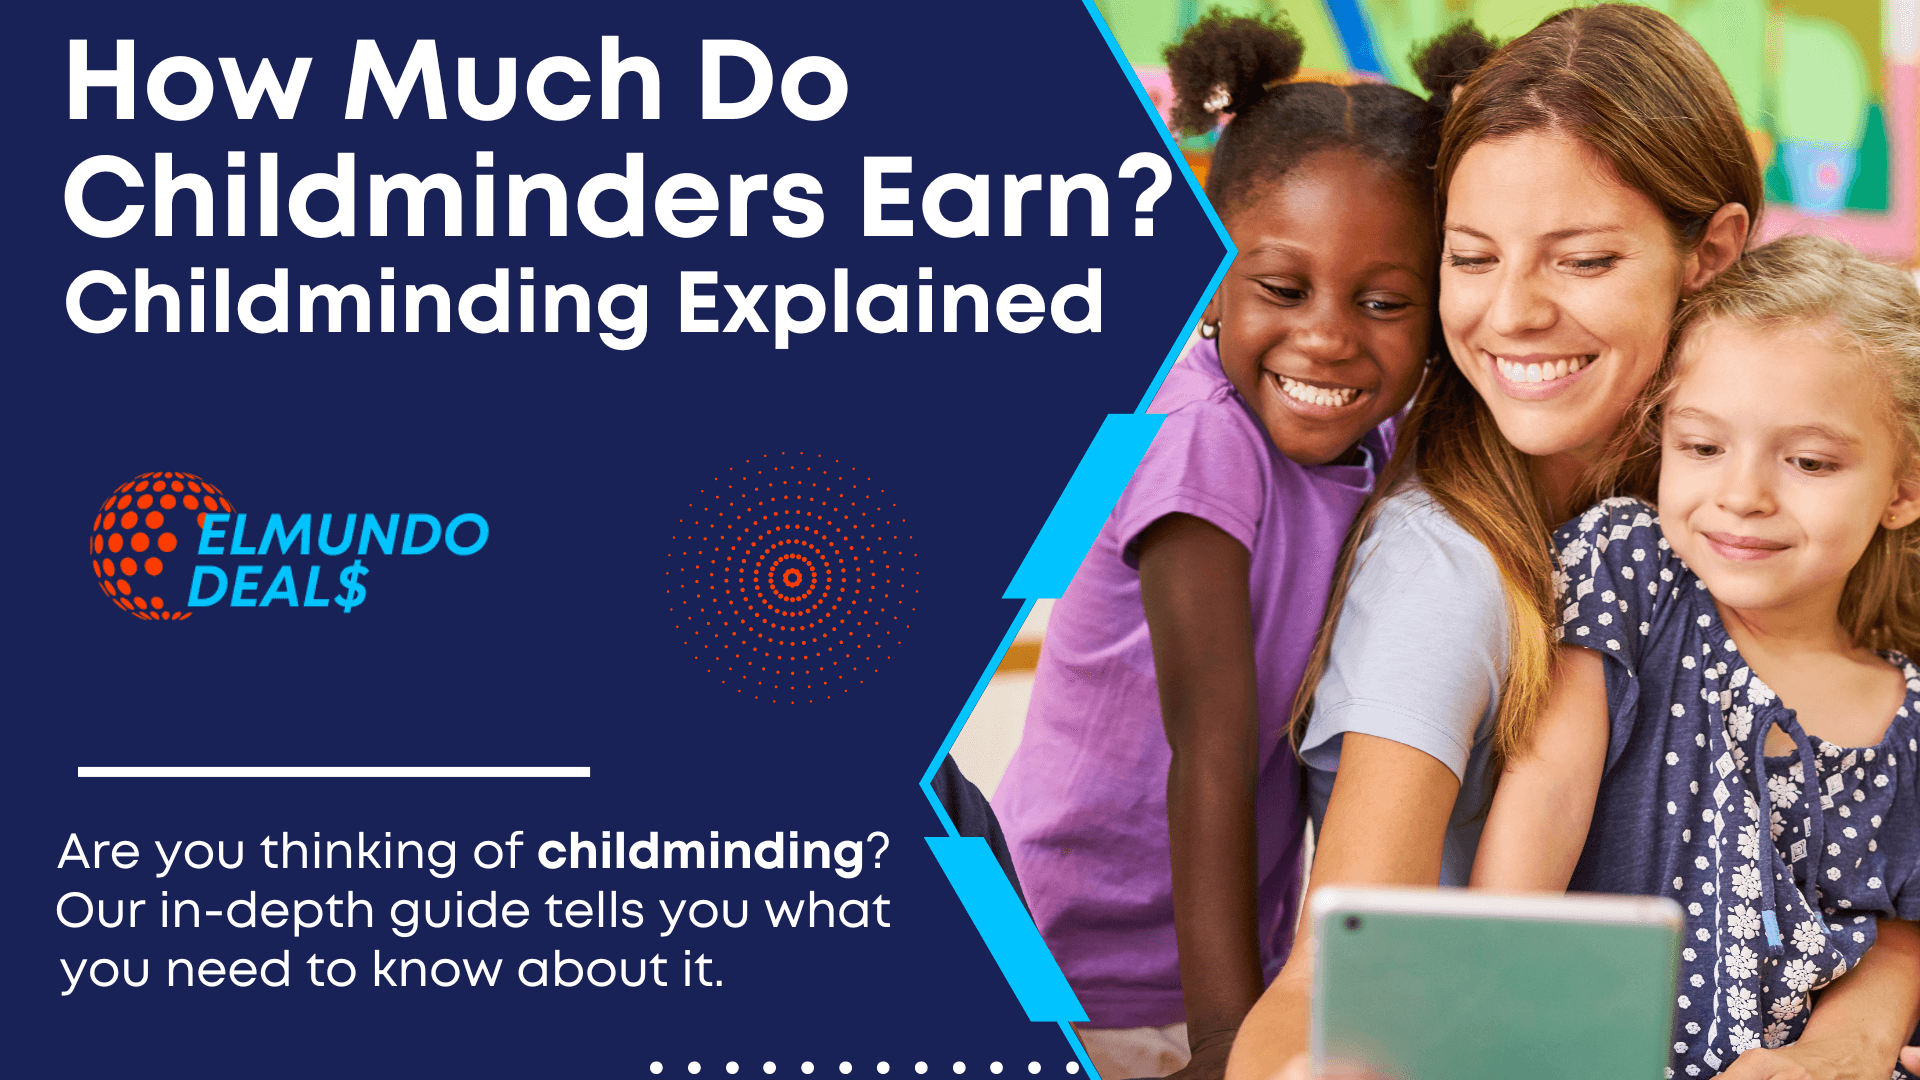 How Much Do Childminders Earn? - Childminding Explained